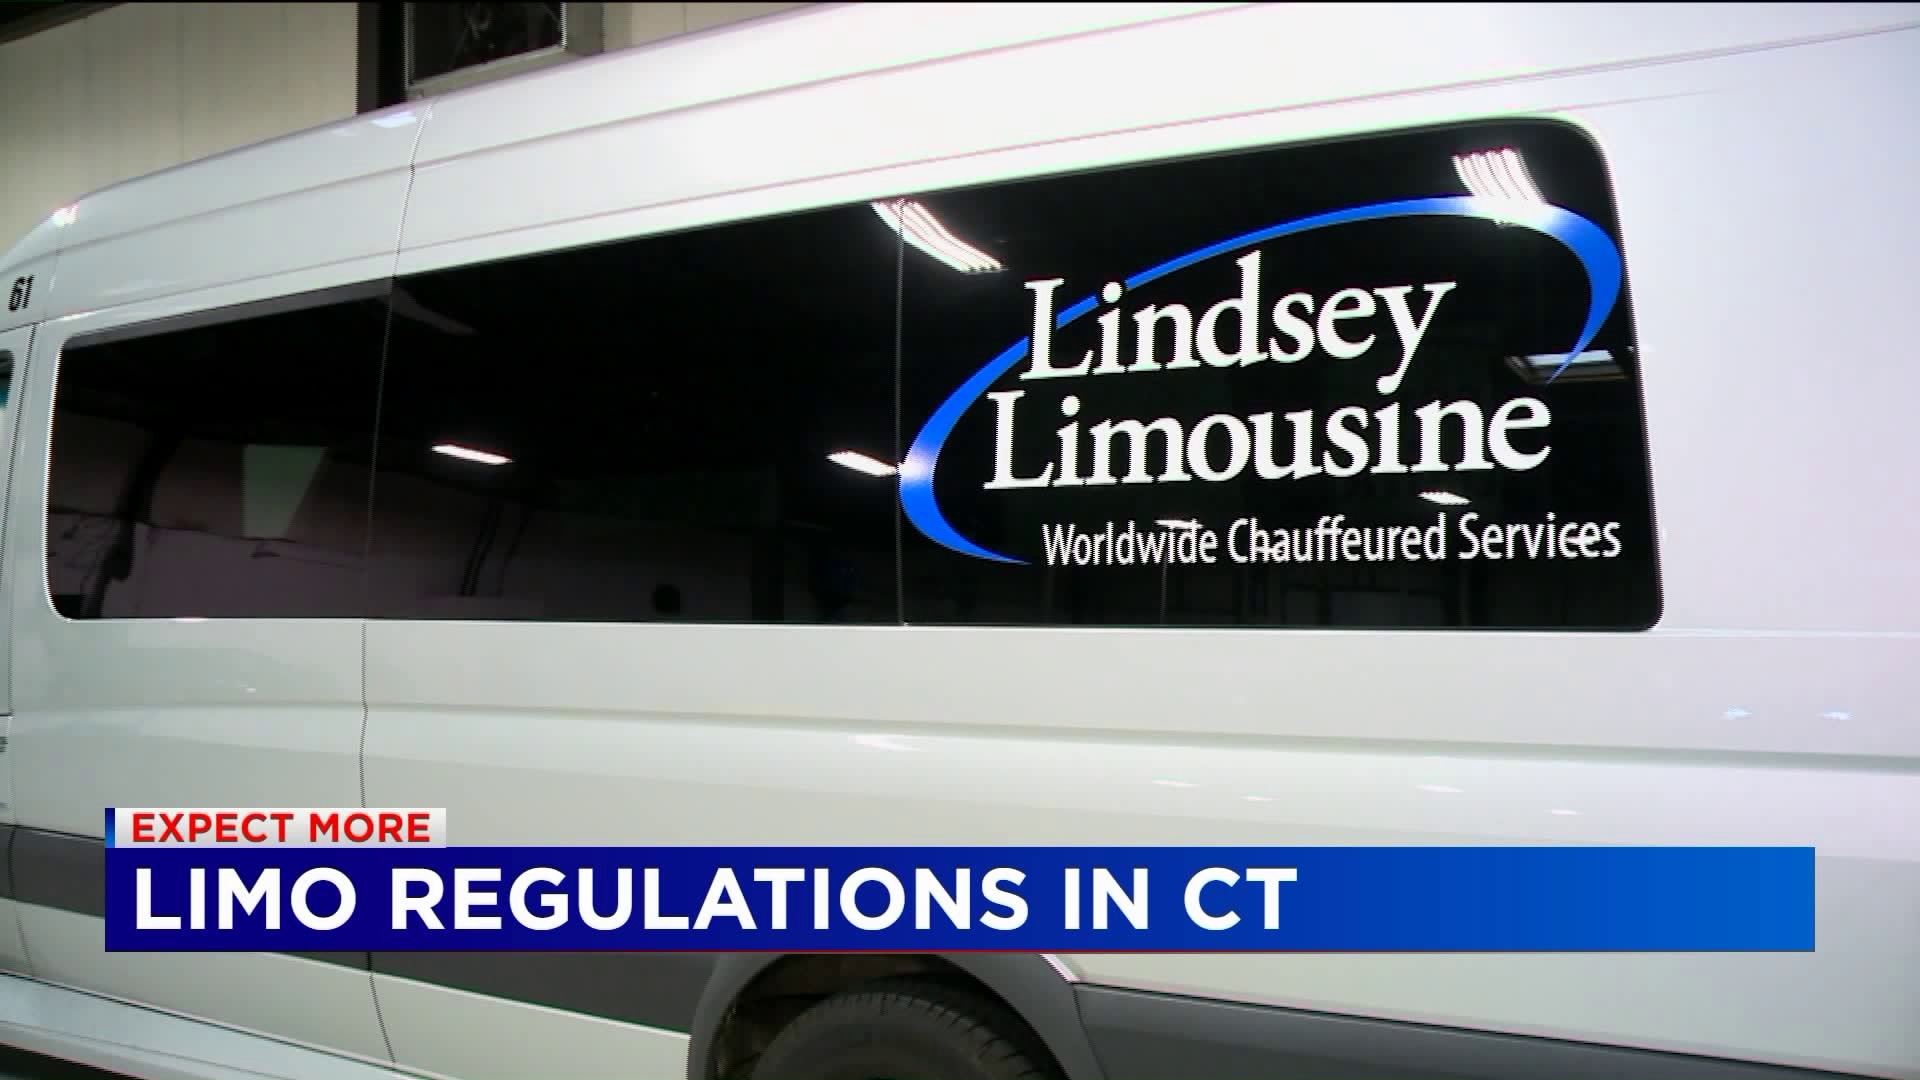 Limo regulations in CT